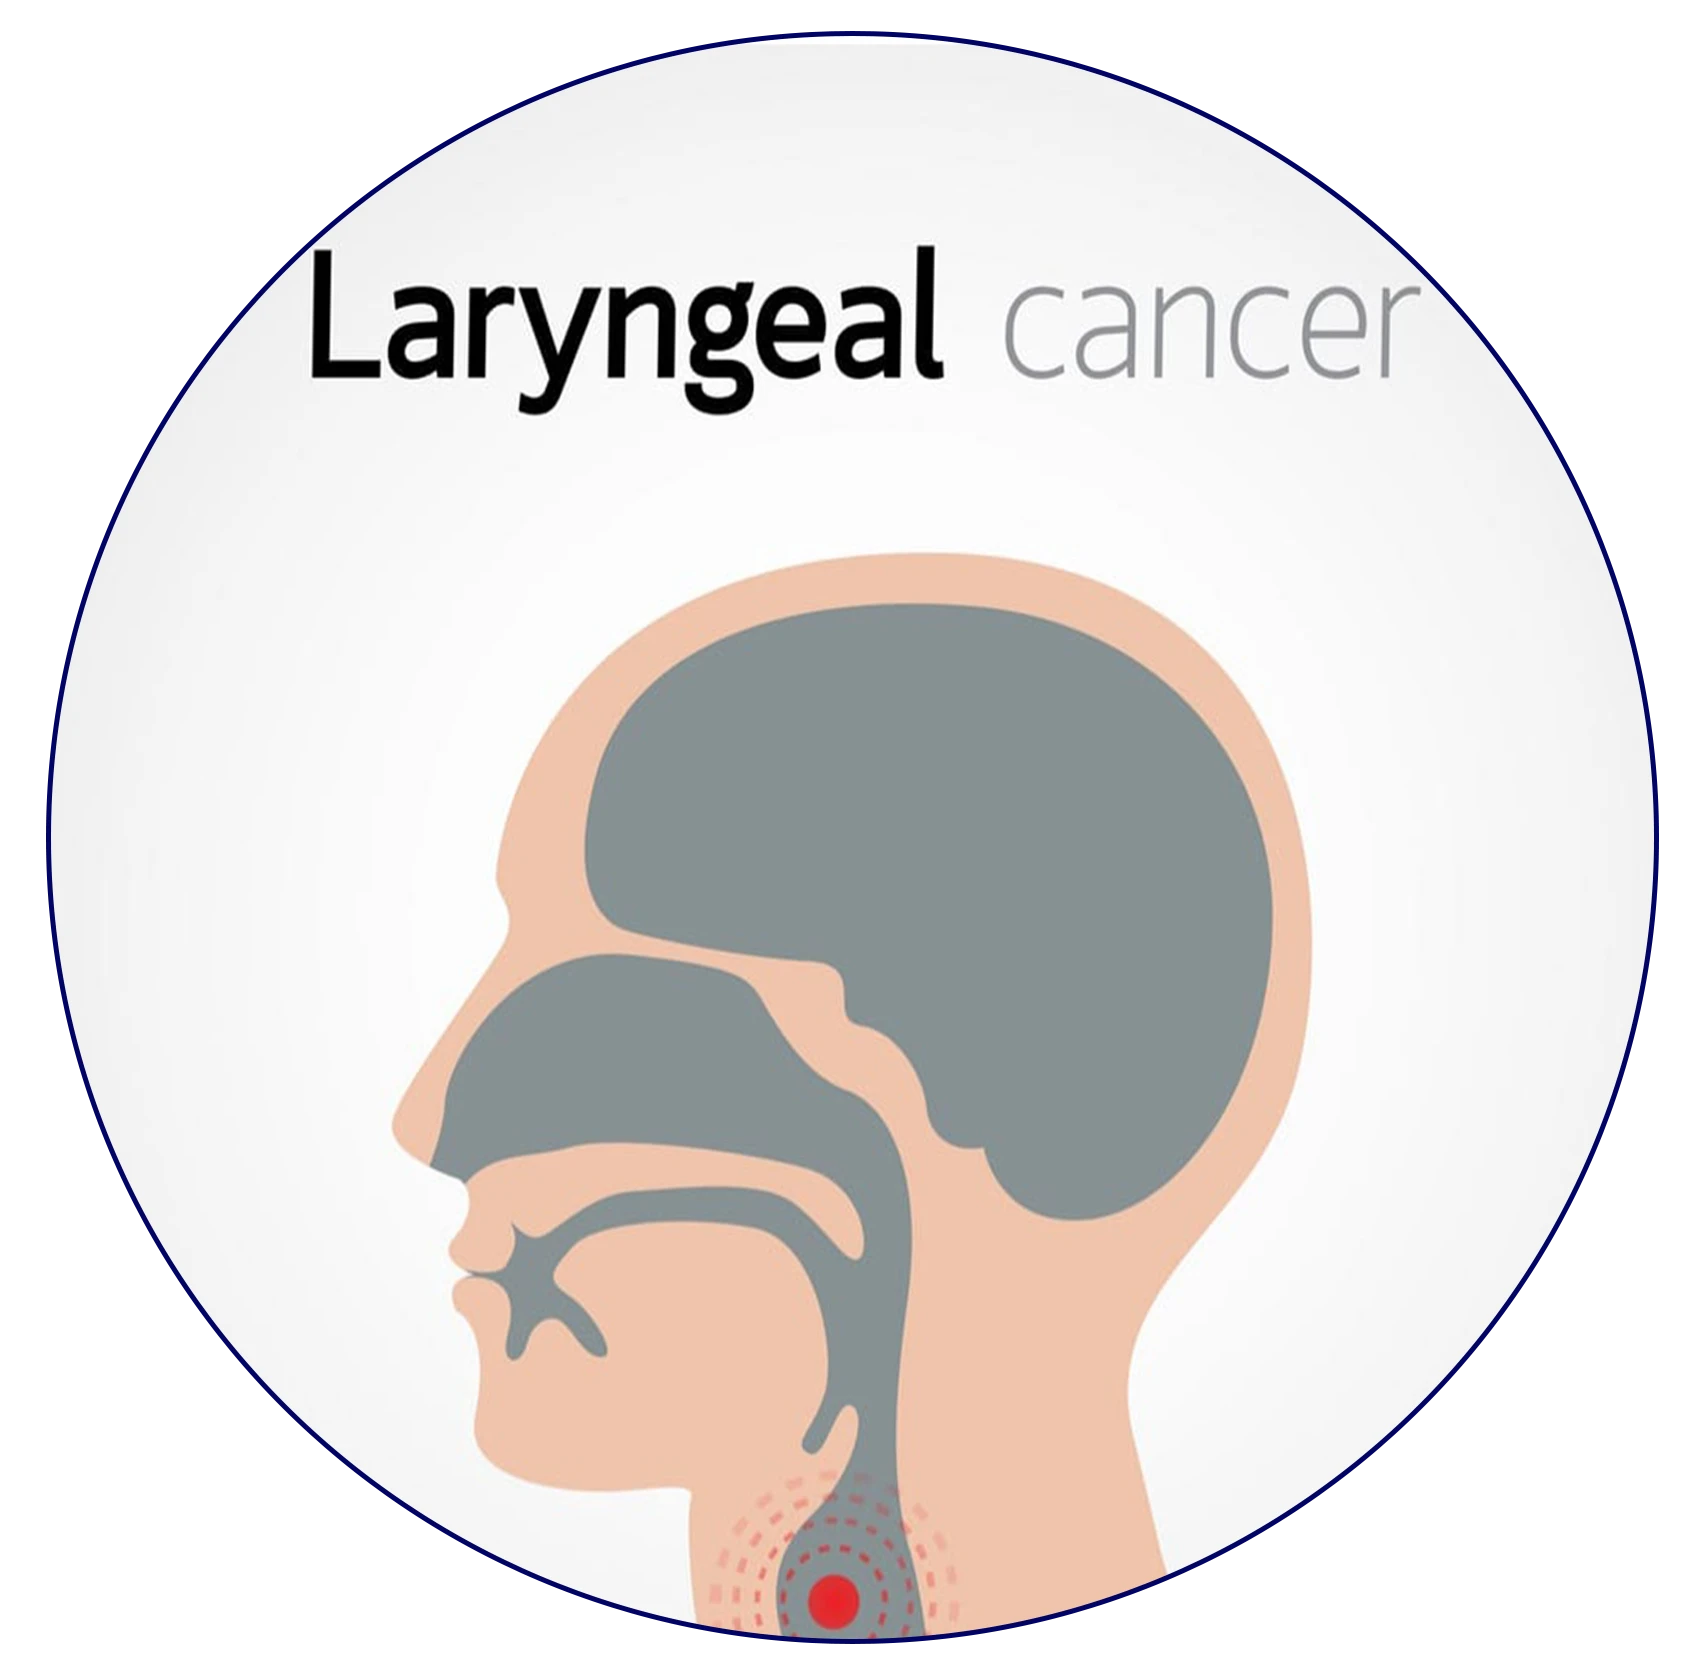 Illustration of Laryngeal Cancer - Anatomy and Disease